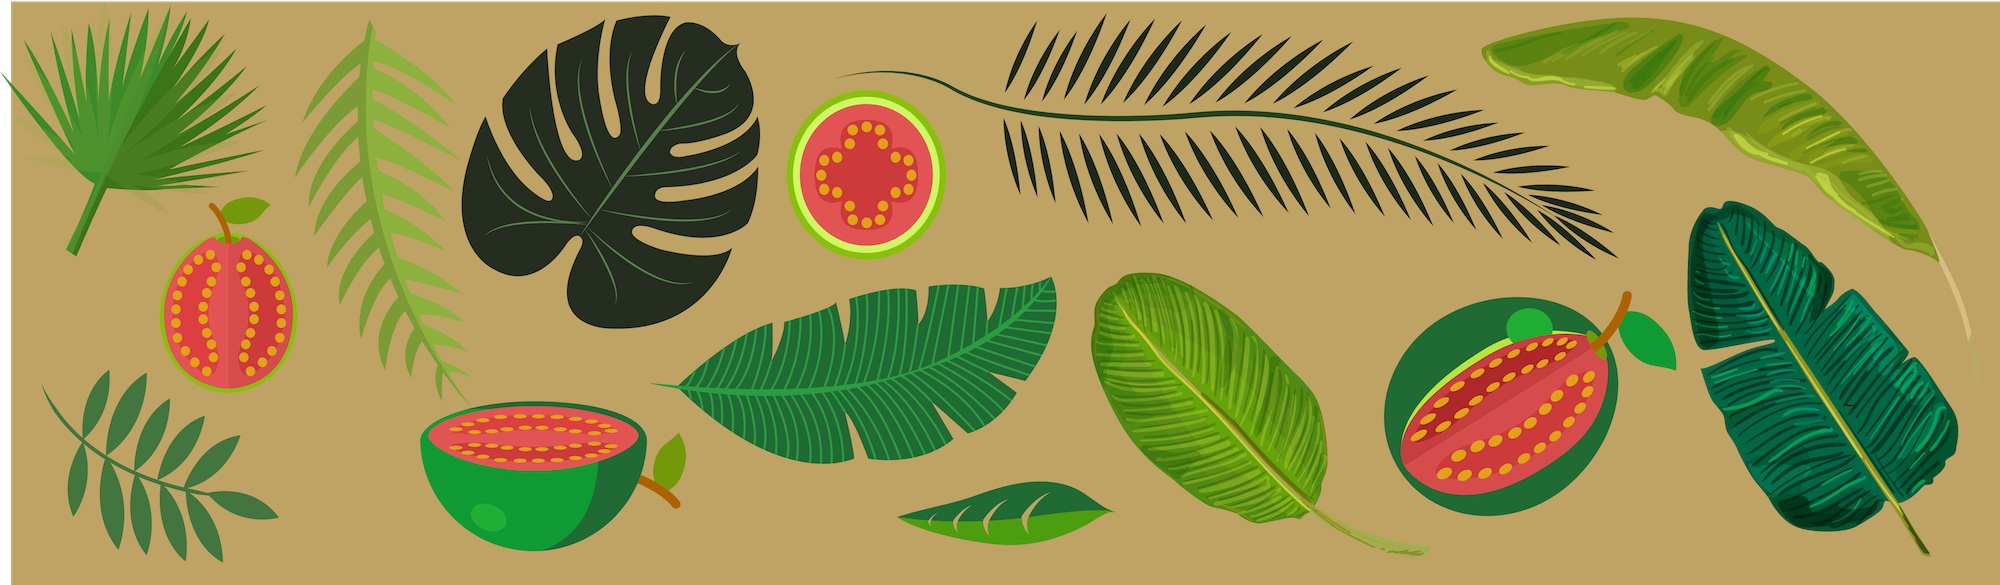 background image with tropical leaves